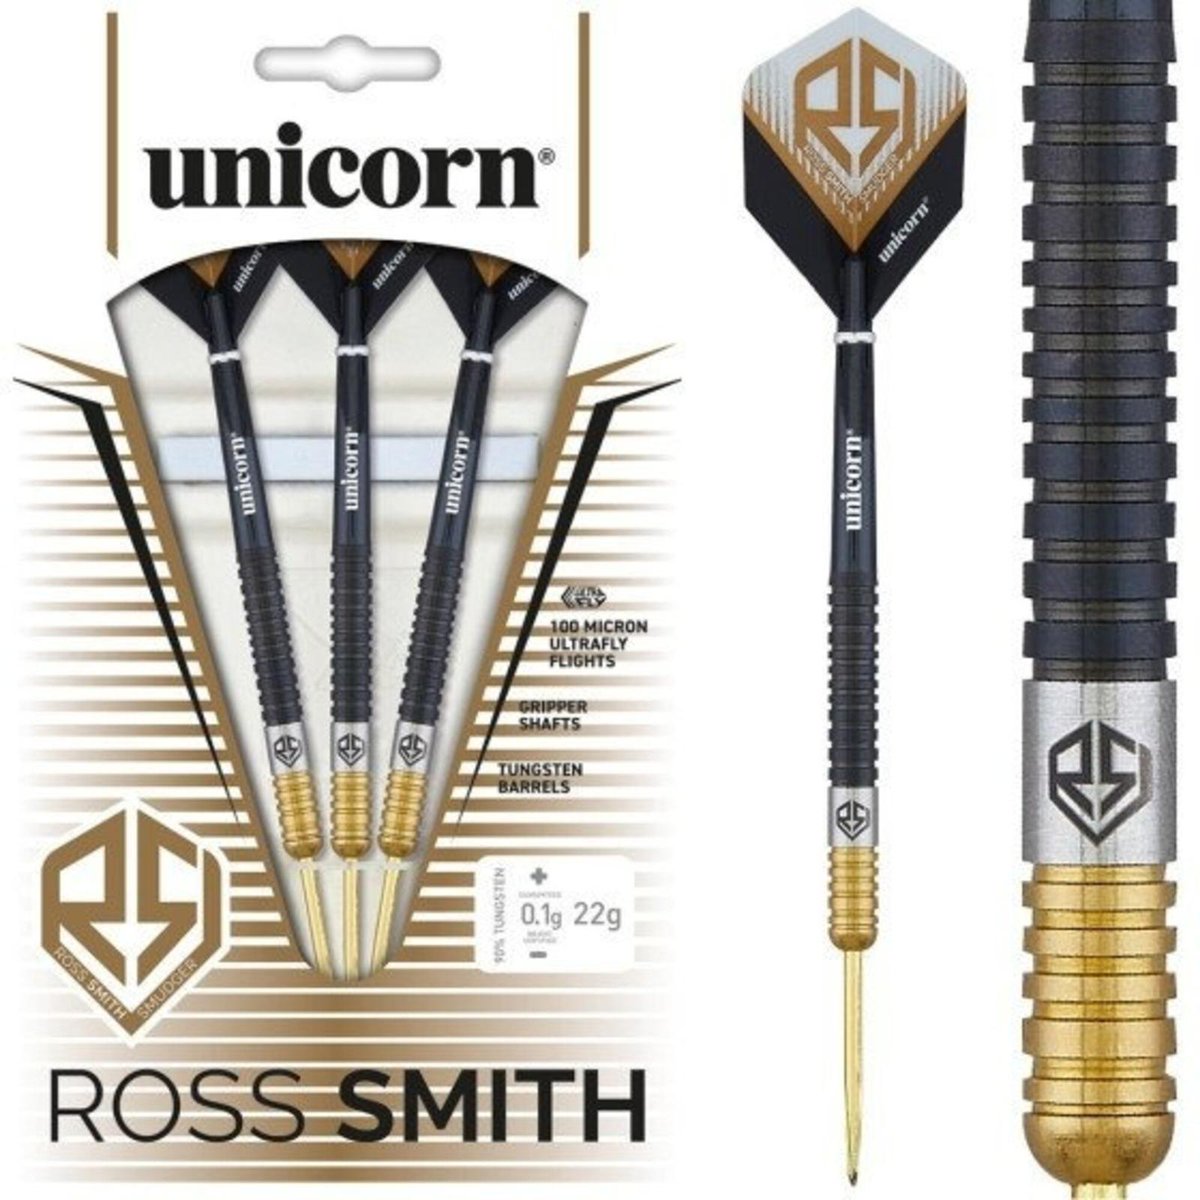 💥 We have a set of the sexiest darts in the game to give away, signed by the man himself 👇 To be in with a chance simply - 🔁 Repost & tag a mate ✔️ Make sure you're following Darts Orakel and @RossSmith180 🙏